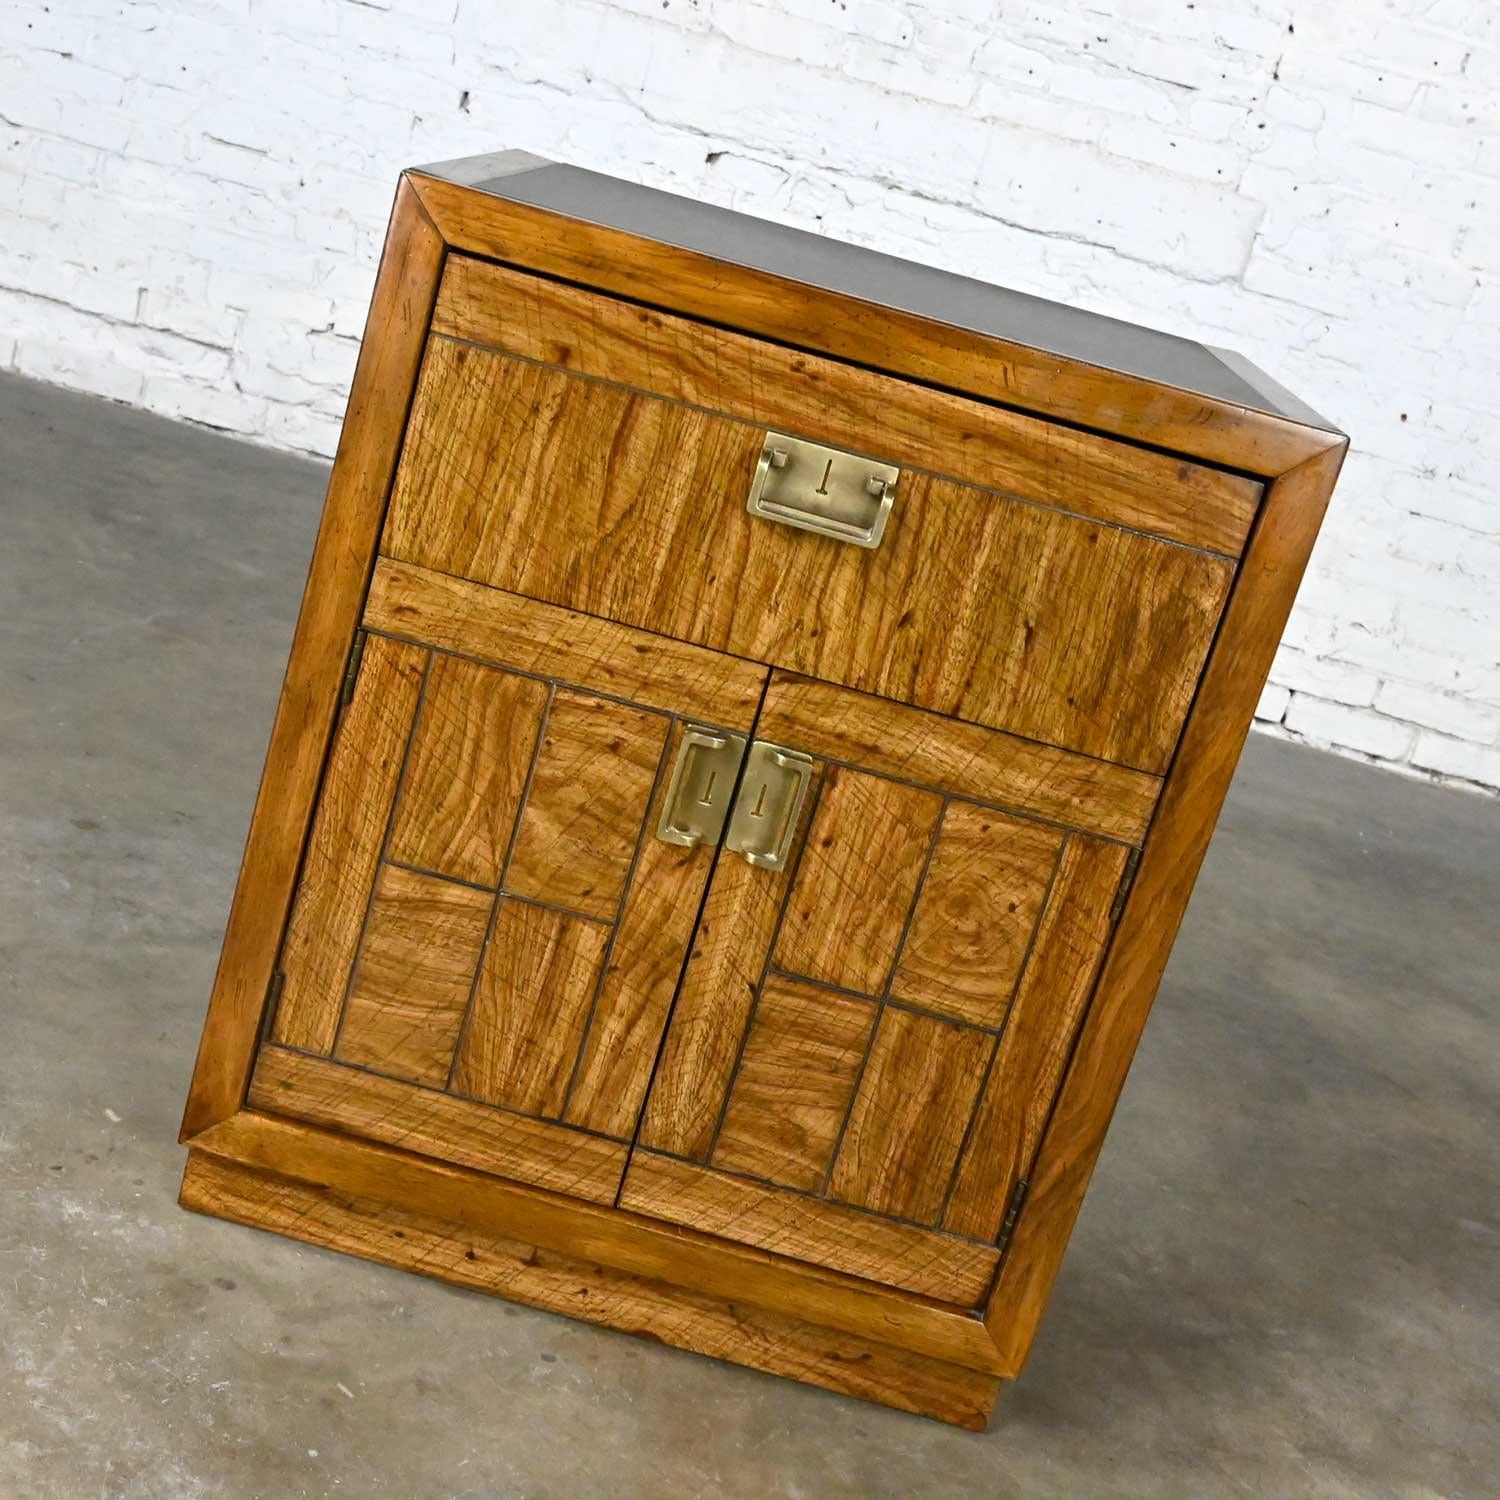 Wonderful vintage Drexel weatherwood Collection Campaign style end table, cabinet, or chest with one drawer, 2 doors with brass plated hardware, and square leather-look laminate top insert. Beautiful condition, keeping in mind that this is vintage